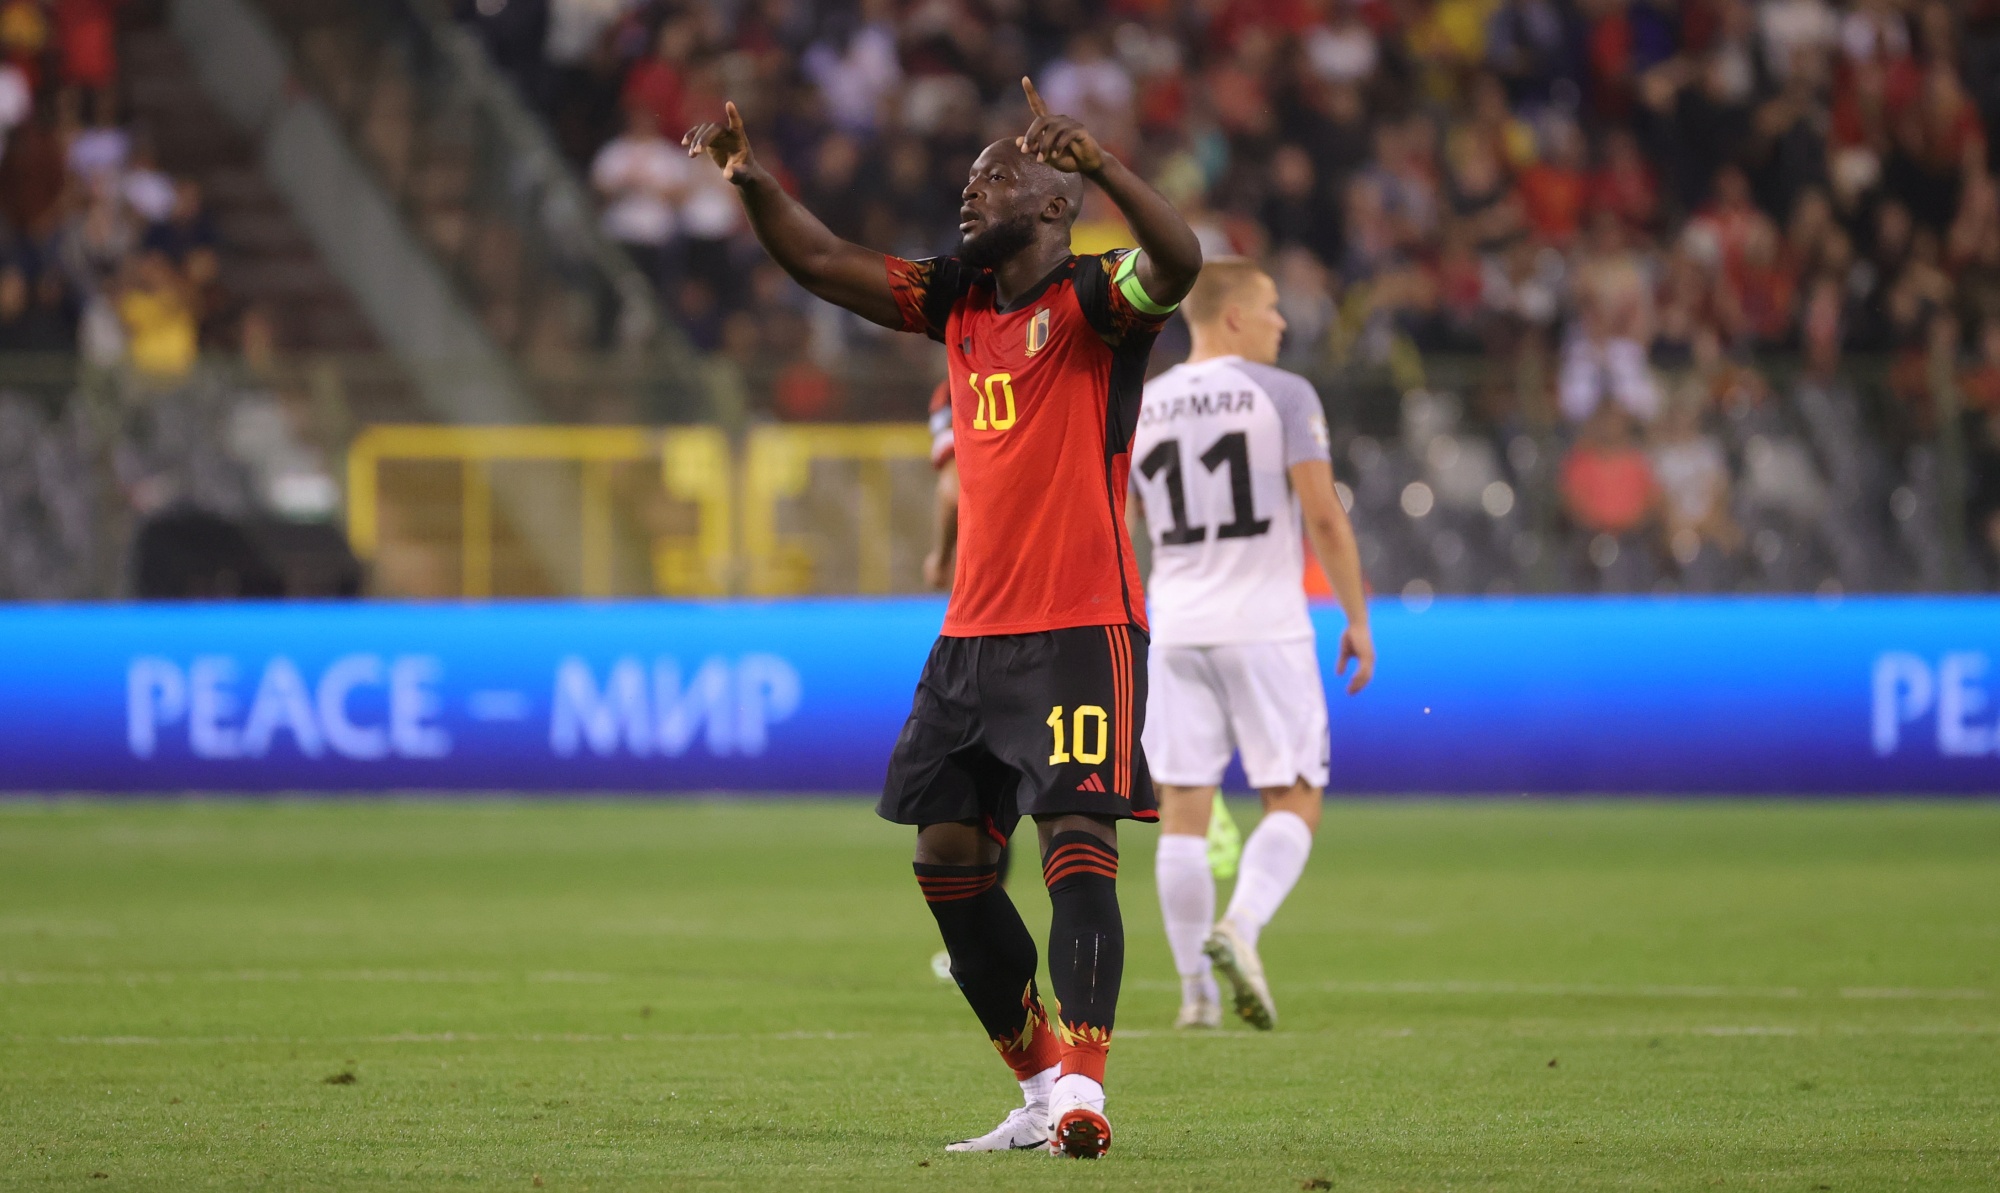 Belgium's Romelu Lukaku celebrates after scoring during a game between the Belgian national soccer team Red Devils and Estonia, in Brussels, Tuesday 12 September 2023, match 5/8 in Group F of the qualifications for the European Soccer Championships 2024. BELGA PHOTO VIRGINIE LEFOUR